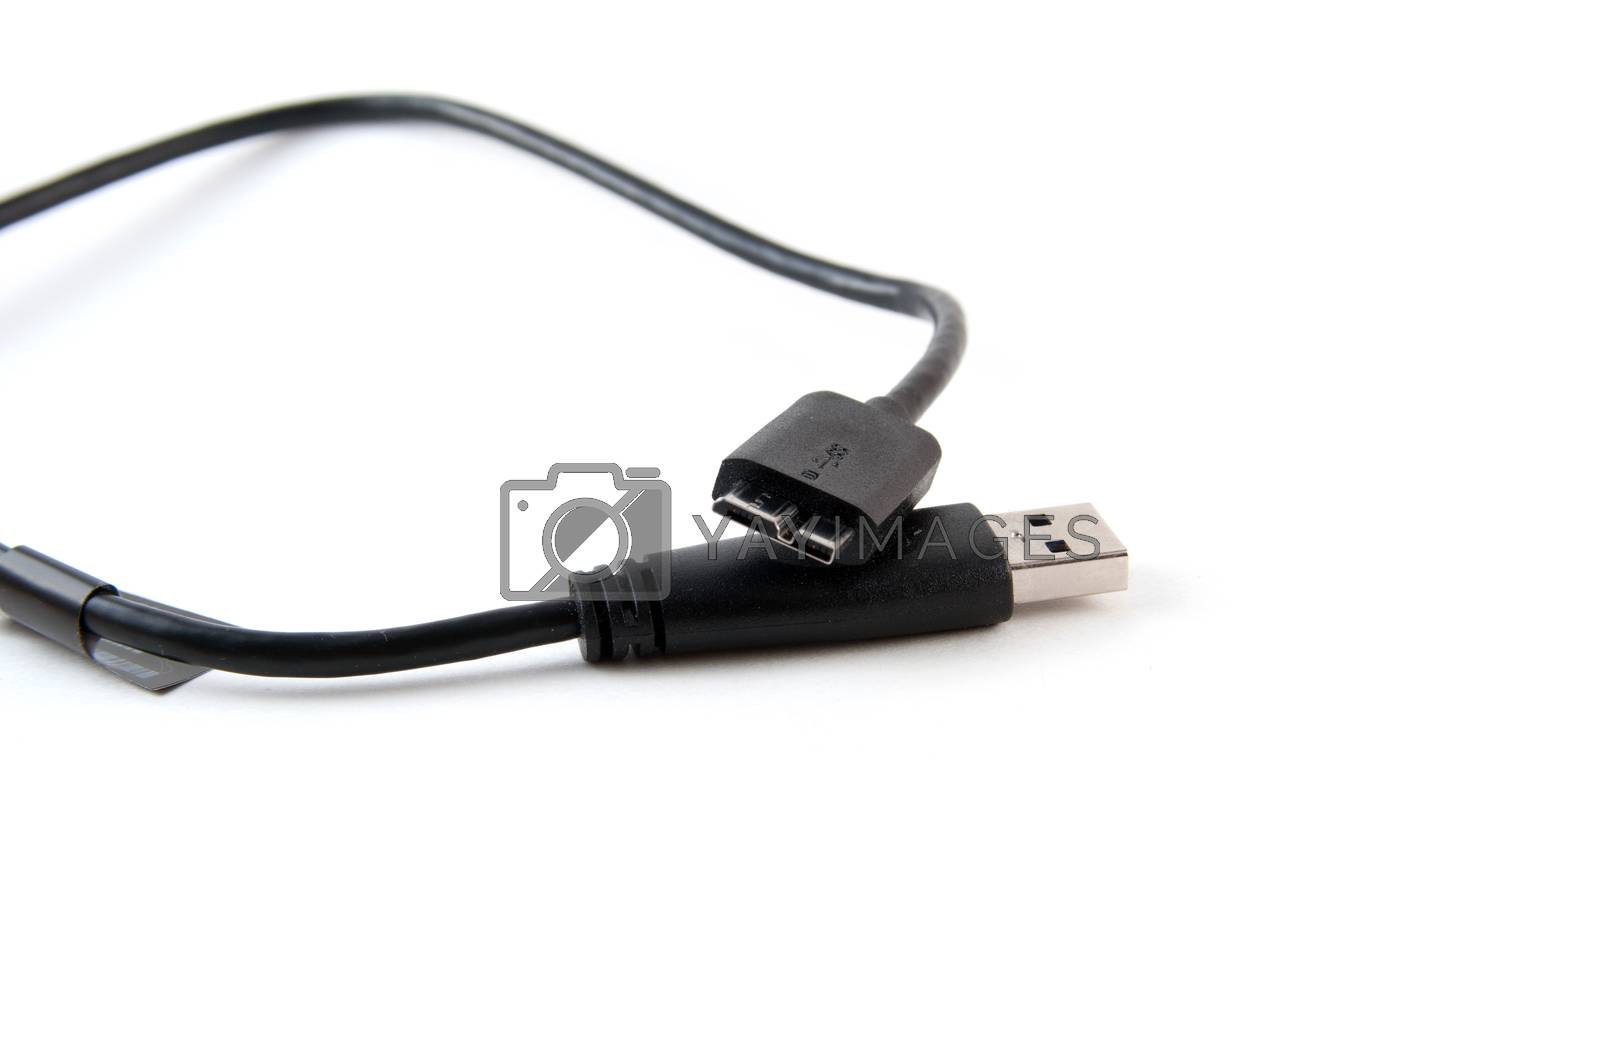 Royalty free image of USB 3 cable by daoleduc